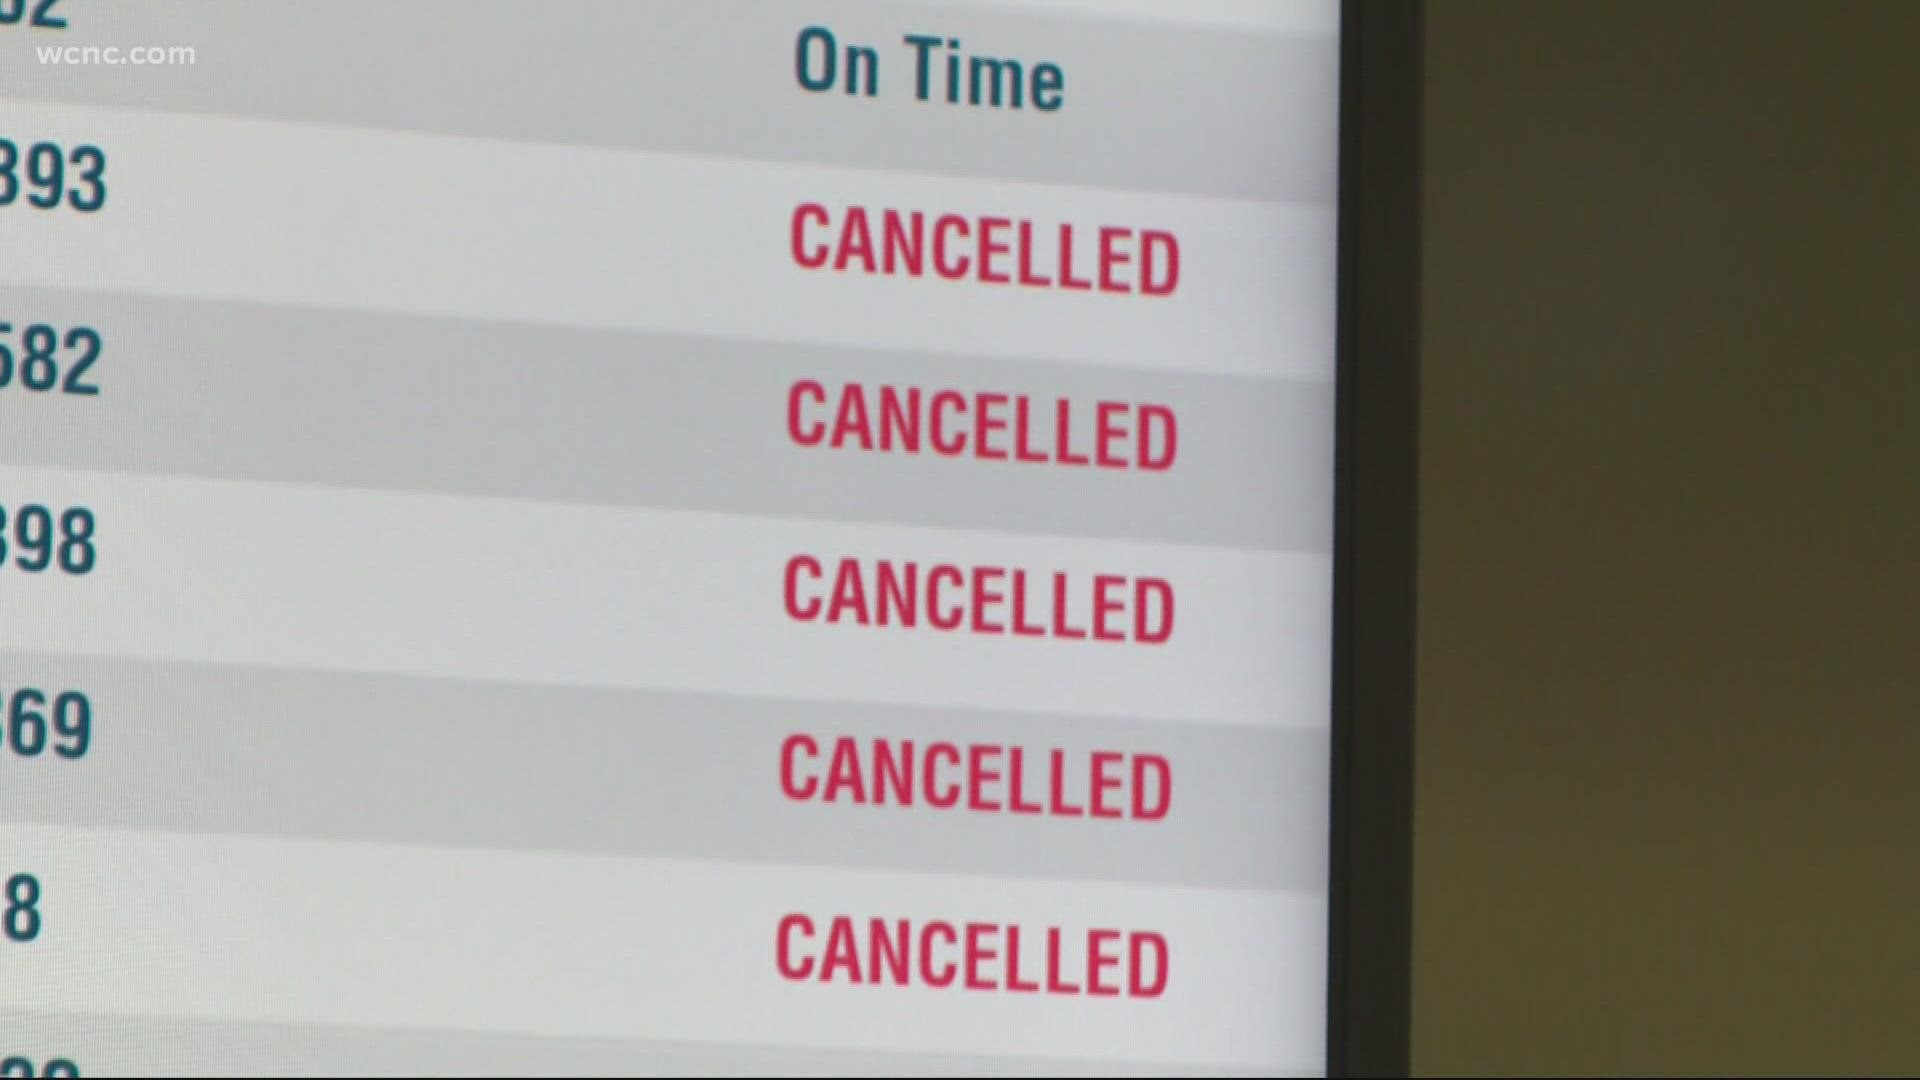 If you are flying anytime soon, be sure you keep checking the status of your flight. Hundreds have been canceled this week, leaving passengers scrambling.